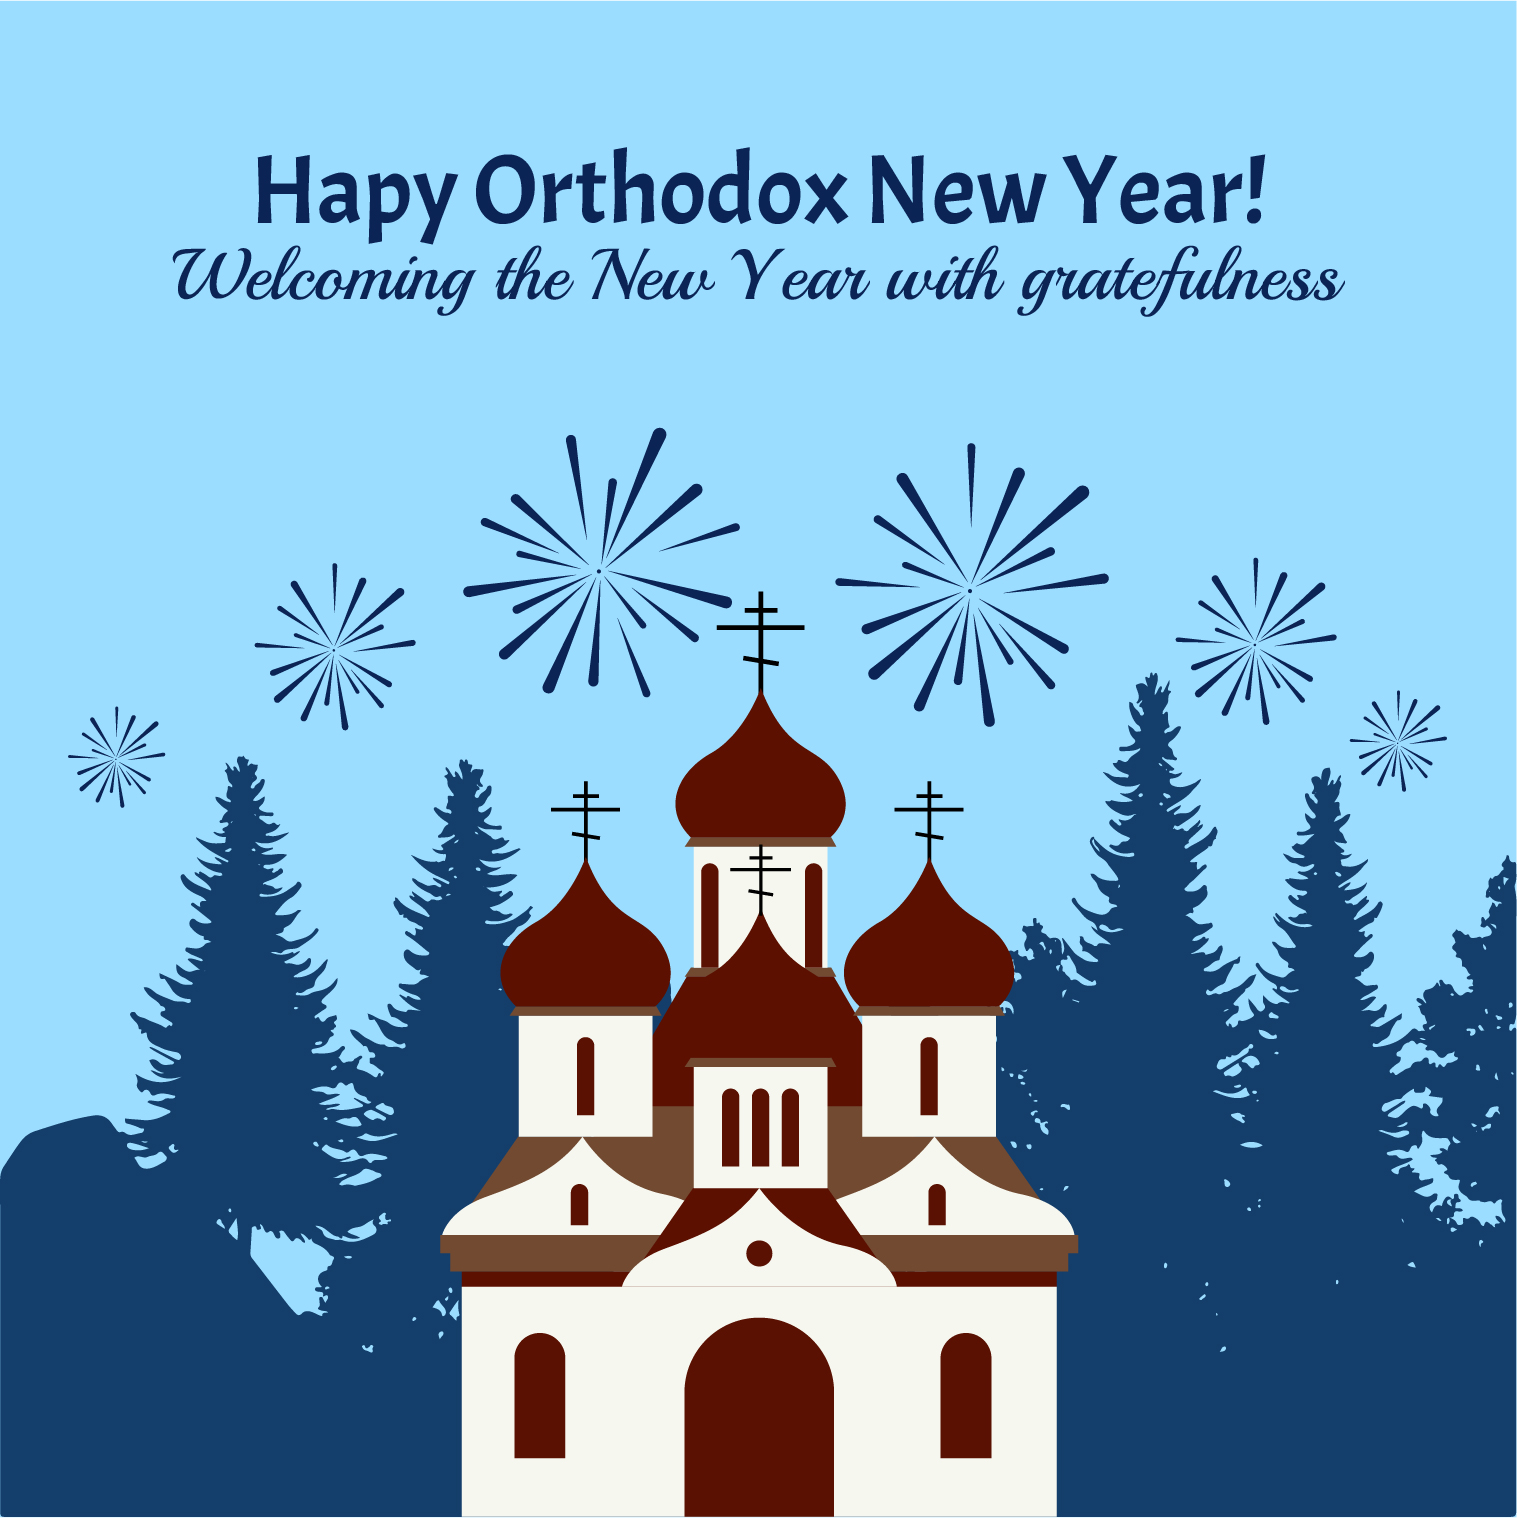 Free Orthodox New Year Poster Vector in Illustrator, PSD, EPS, SVG, JPG, PNG